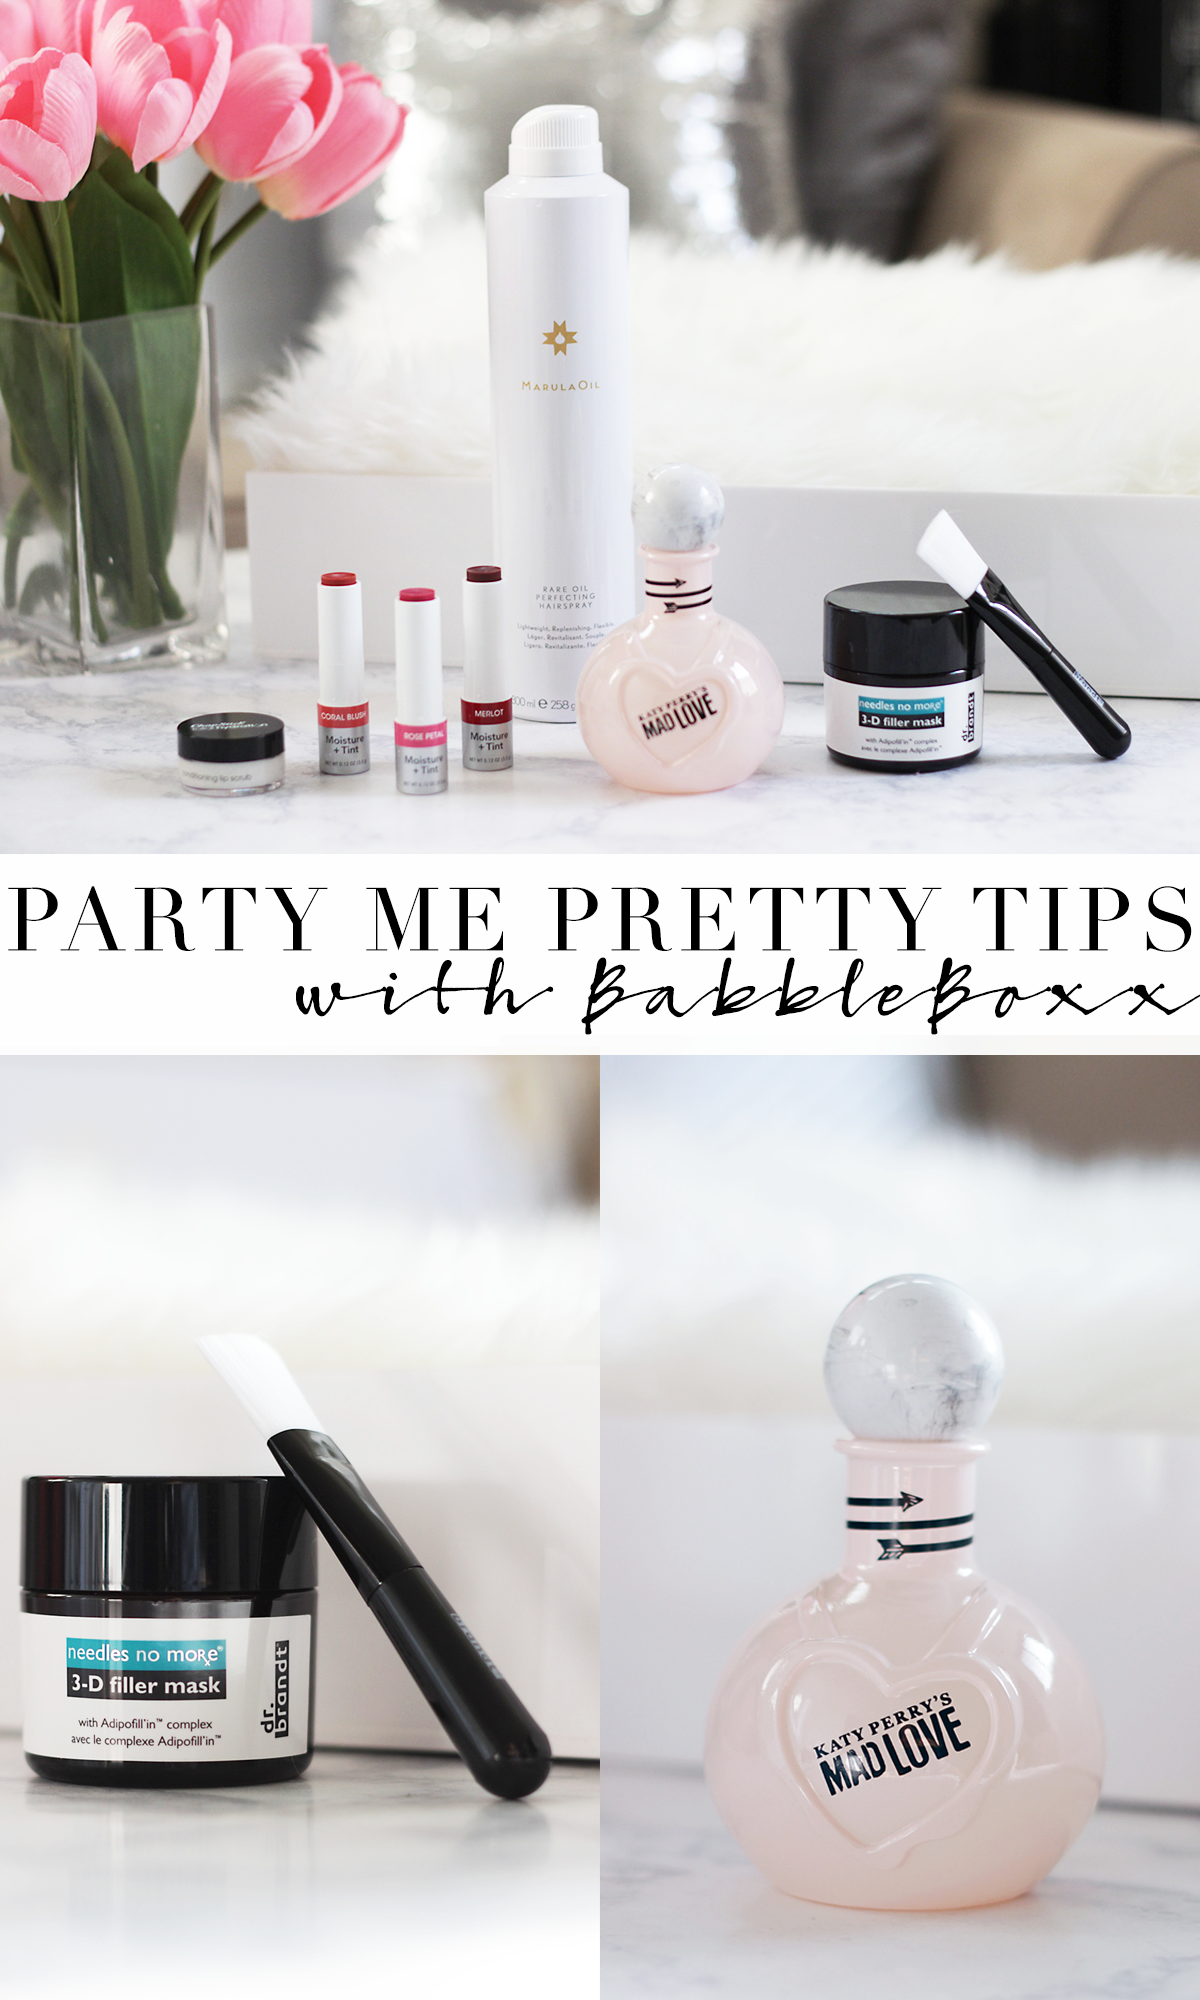 The holidays are here and party season is in full effect, check out these 4 easy Party Me Pretty tips to keep you looking party ready all holiday season long. BabbleBoxx- Makeup Life and Love